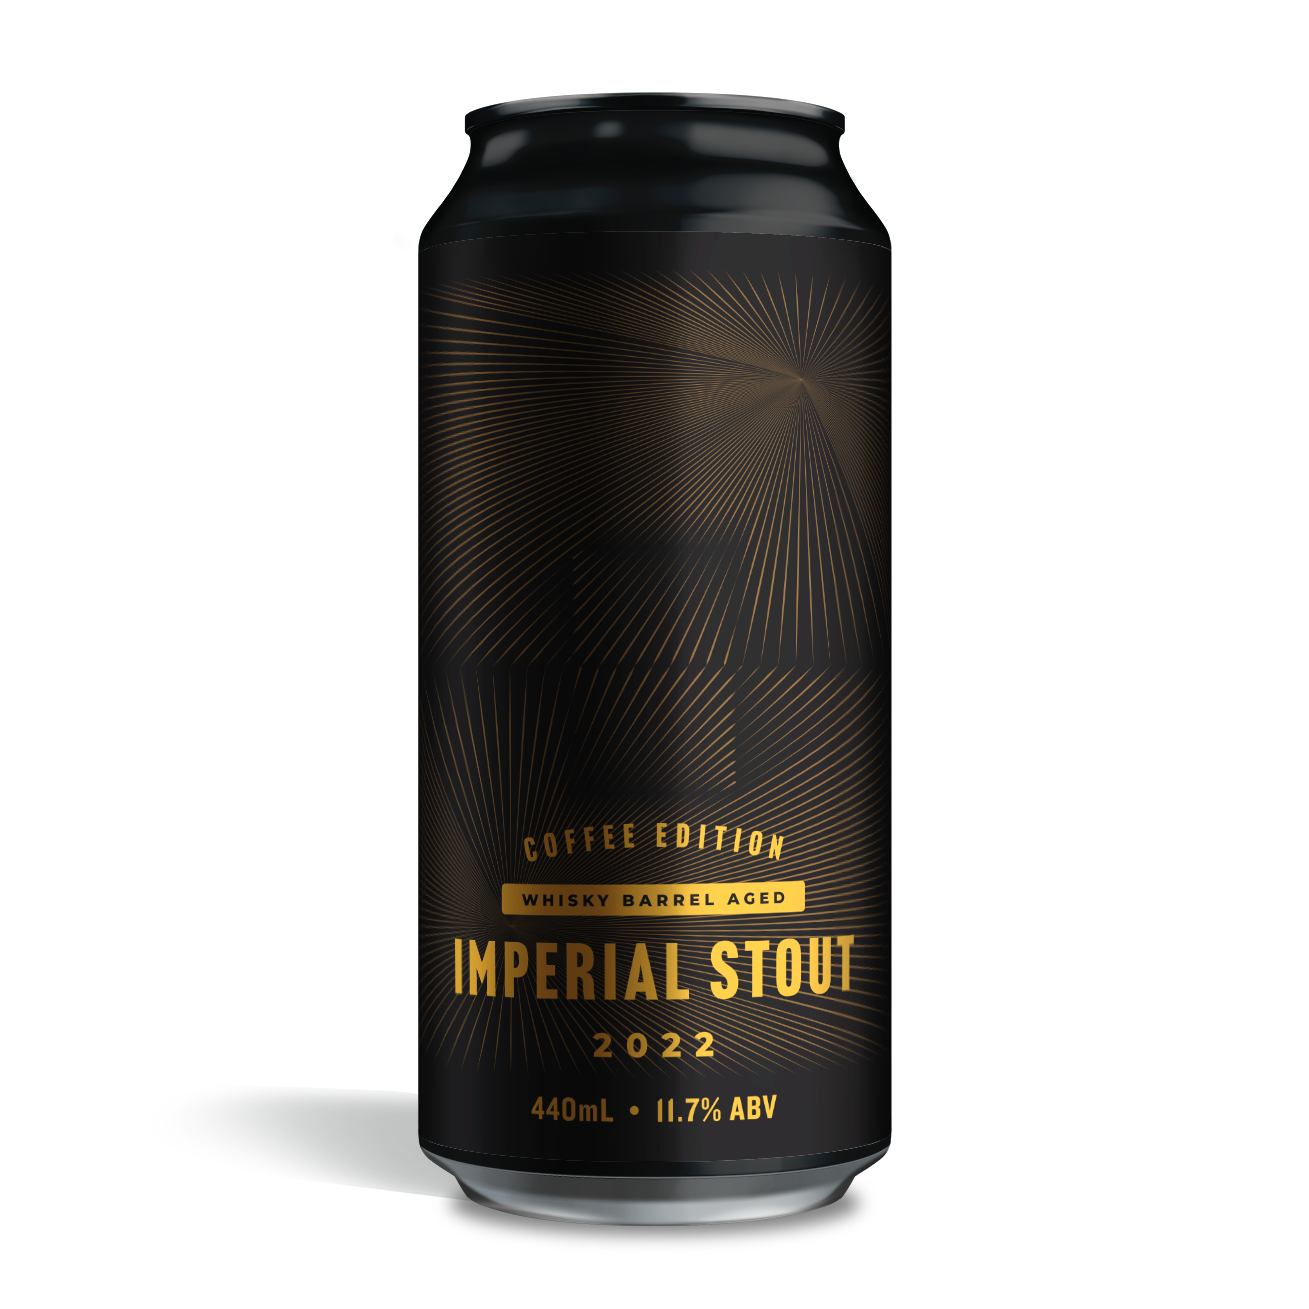 Whisky Barrel Aged Imperial Stout - Coffee Edition (2022)